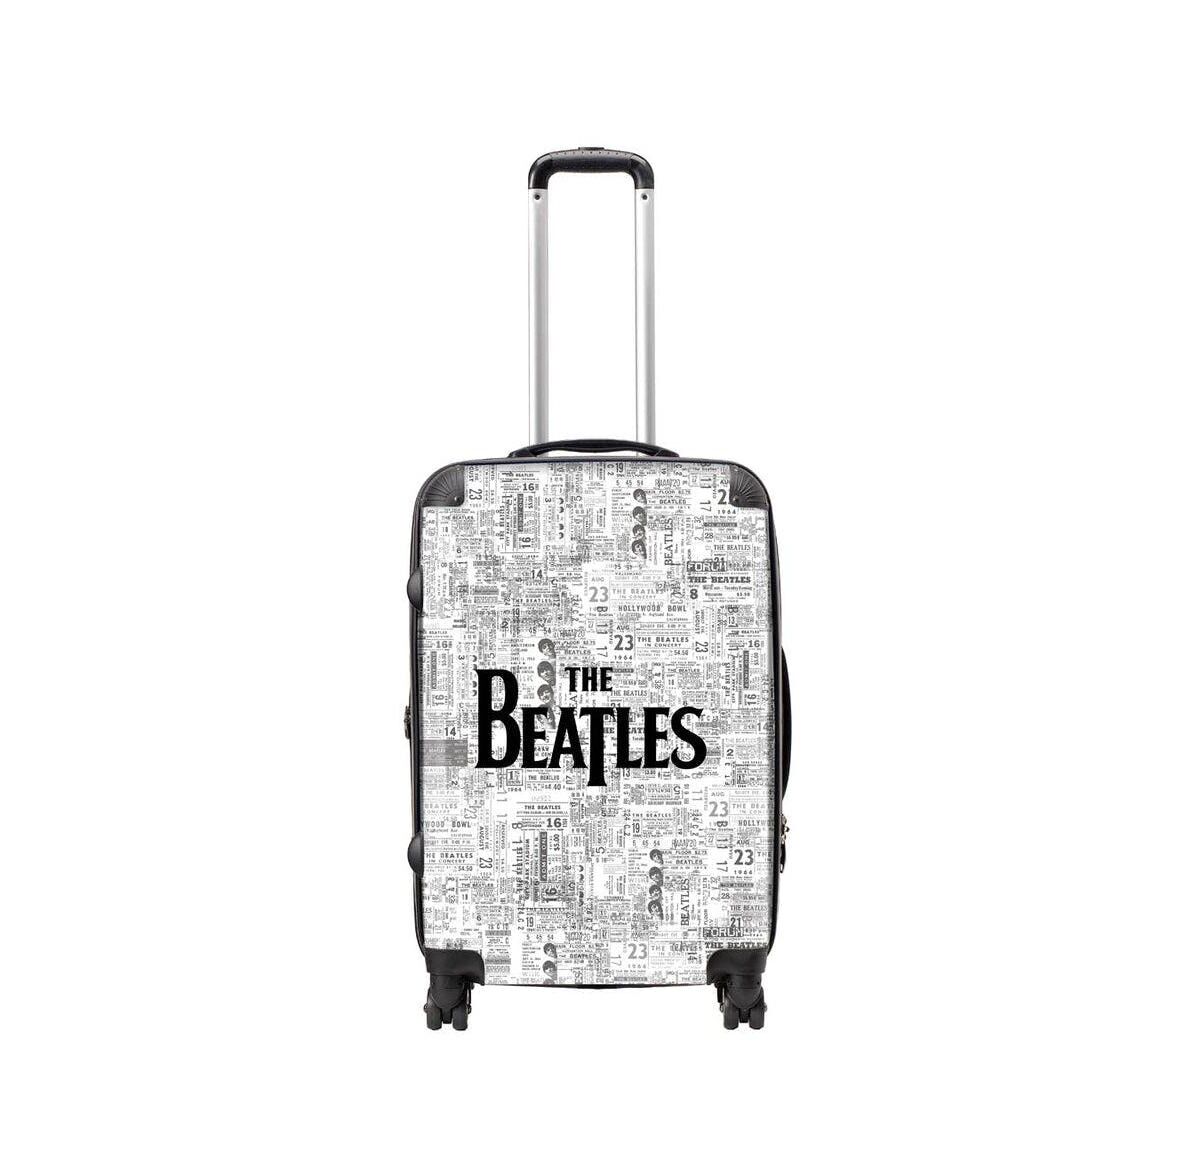 Rocksax The Beatles Tour Series Luggage - Tickets - Medium - Check In - Multi-colored